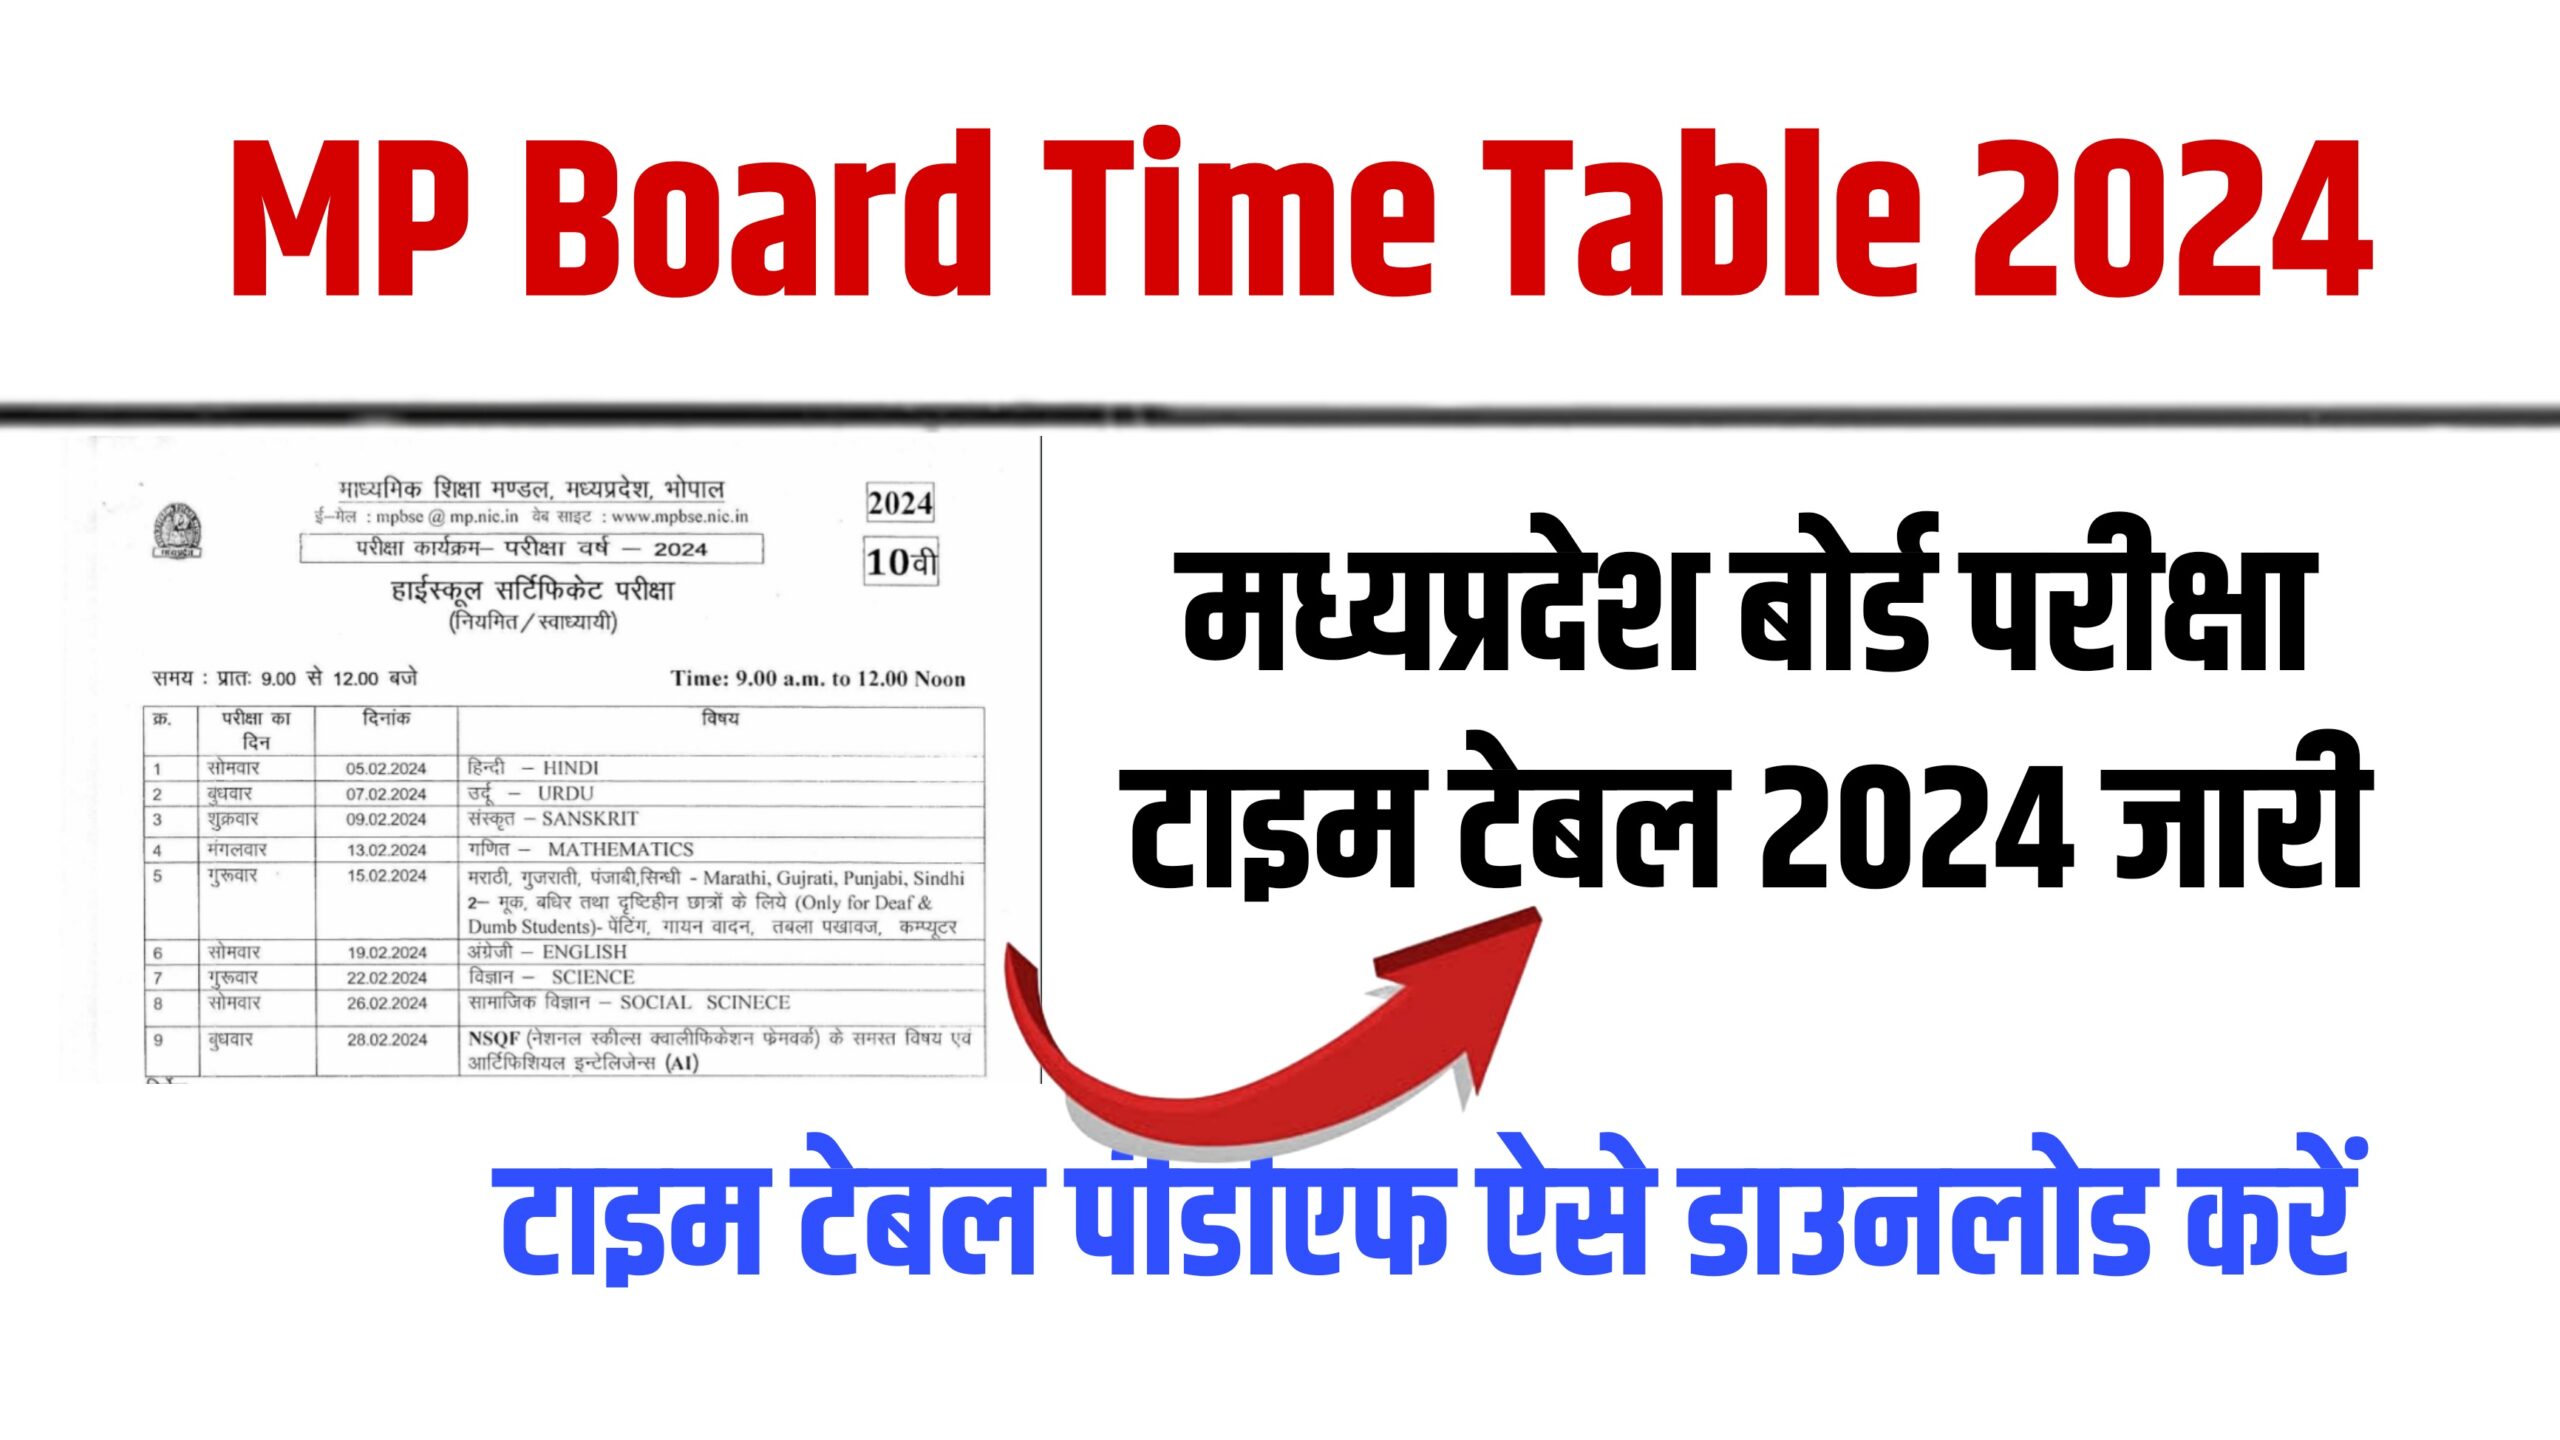 MP Board Exam Time Table 2024